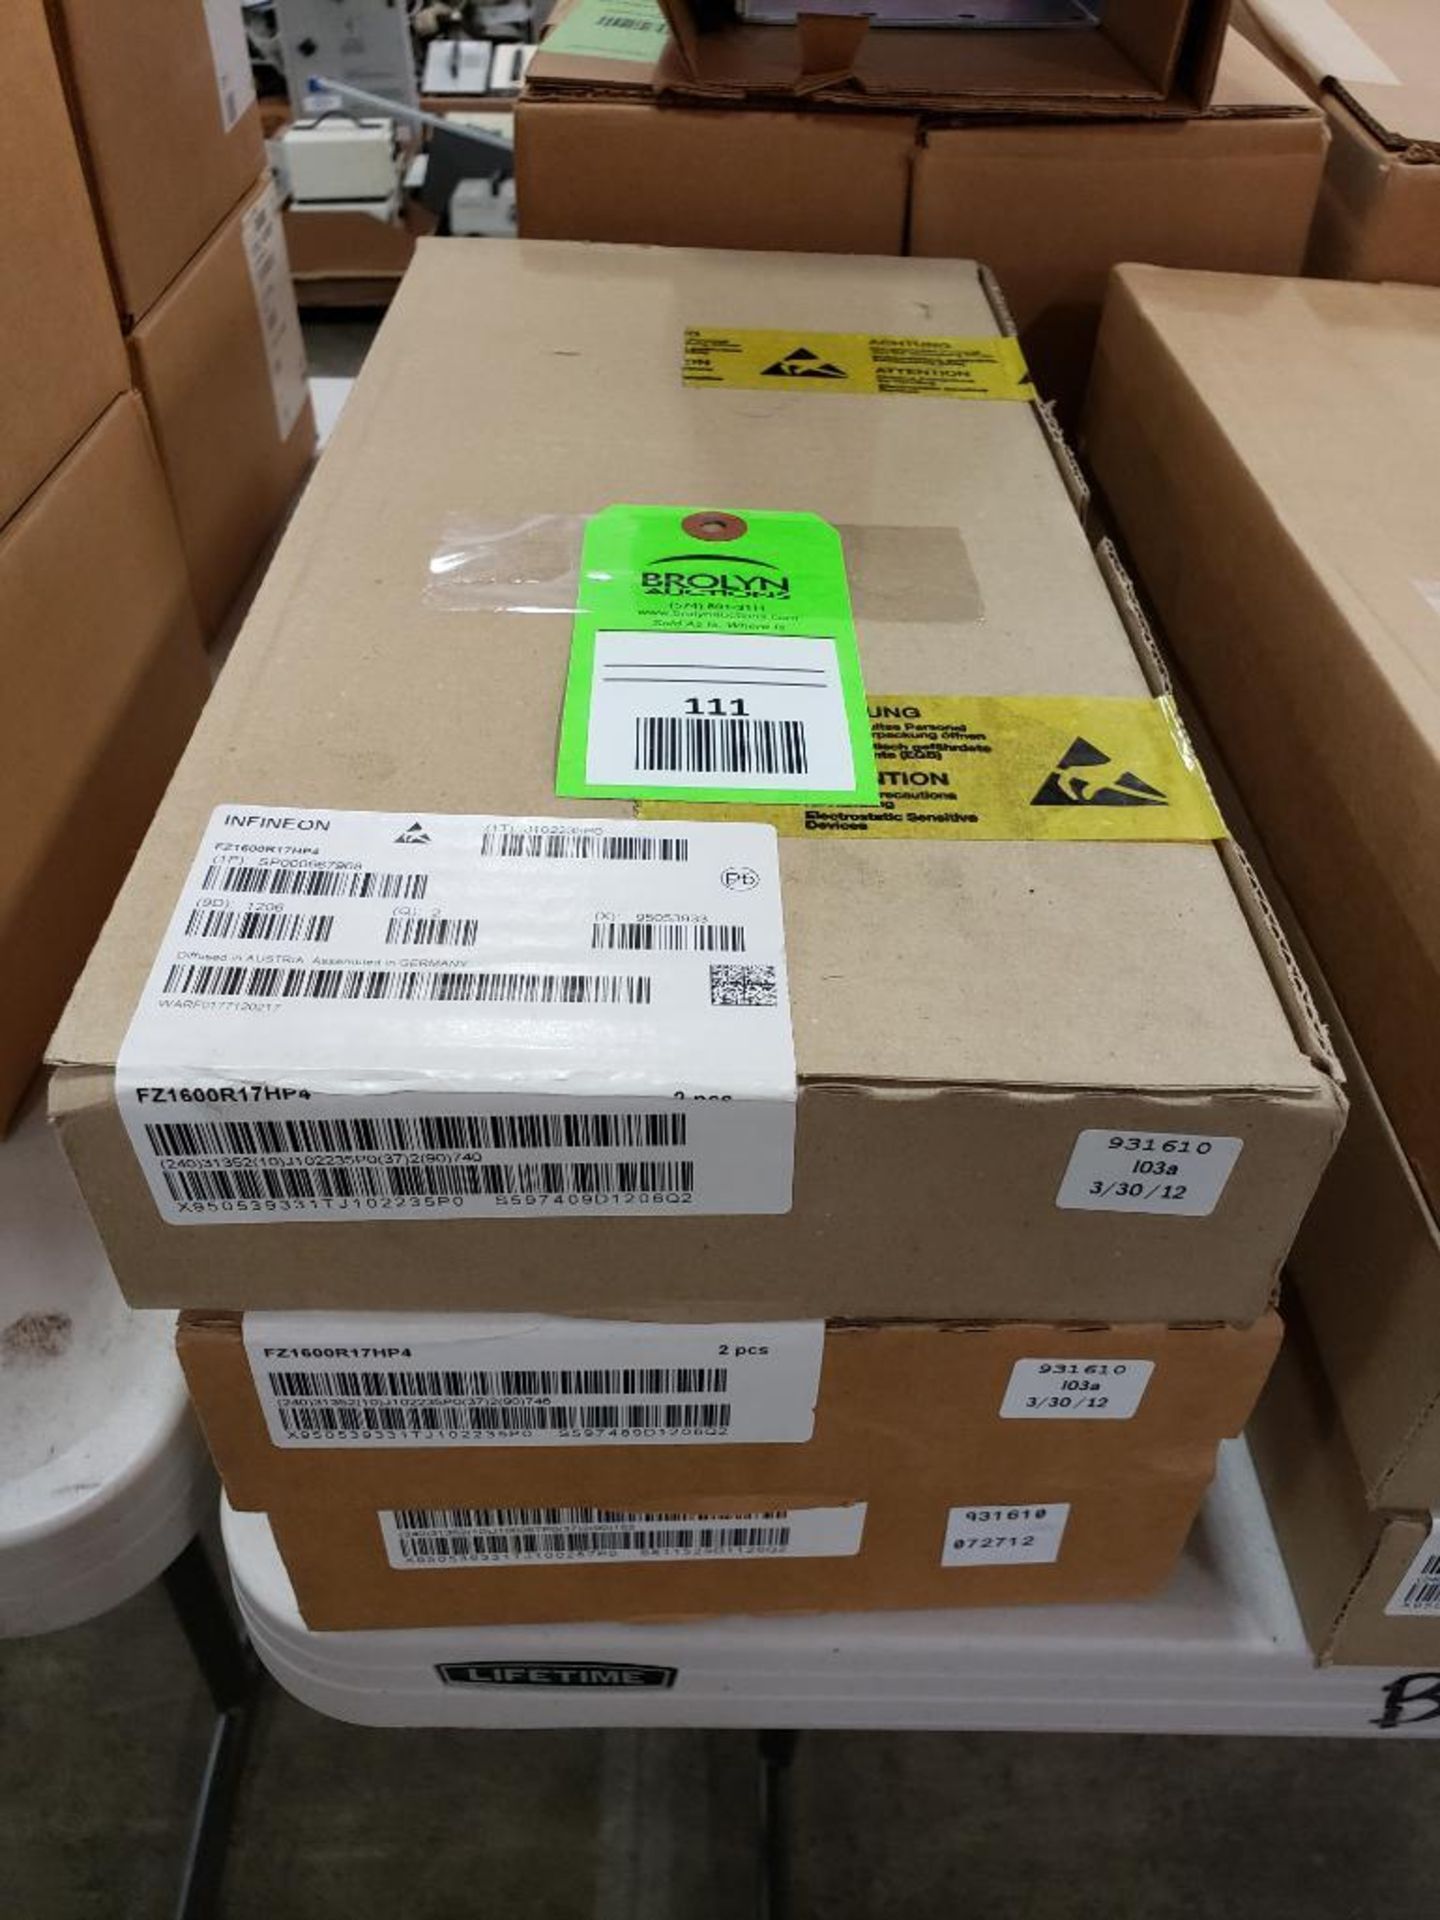 Qty 6 - Infineon semiconductor units. Part number FZ1600R17HP4. Boxed 2 per box bulk. New in box.